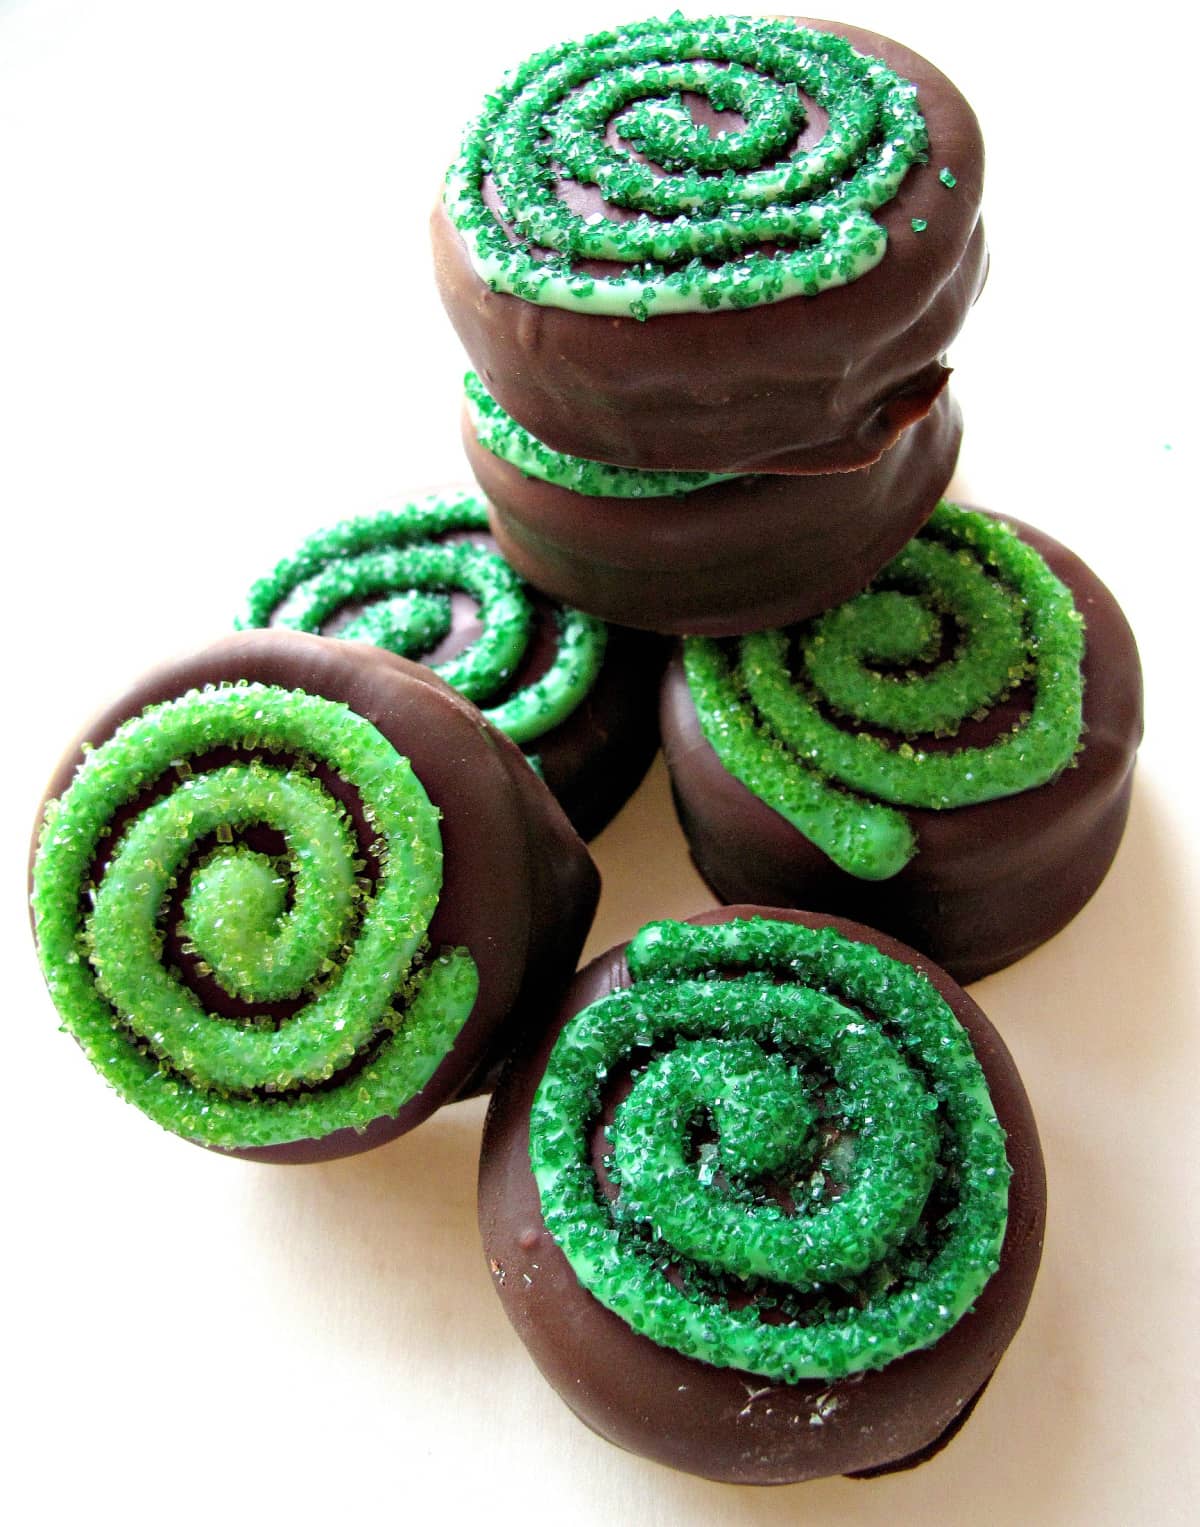 Chocolate Covered Oreos with a green sparkle sugar coated swirl on top.